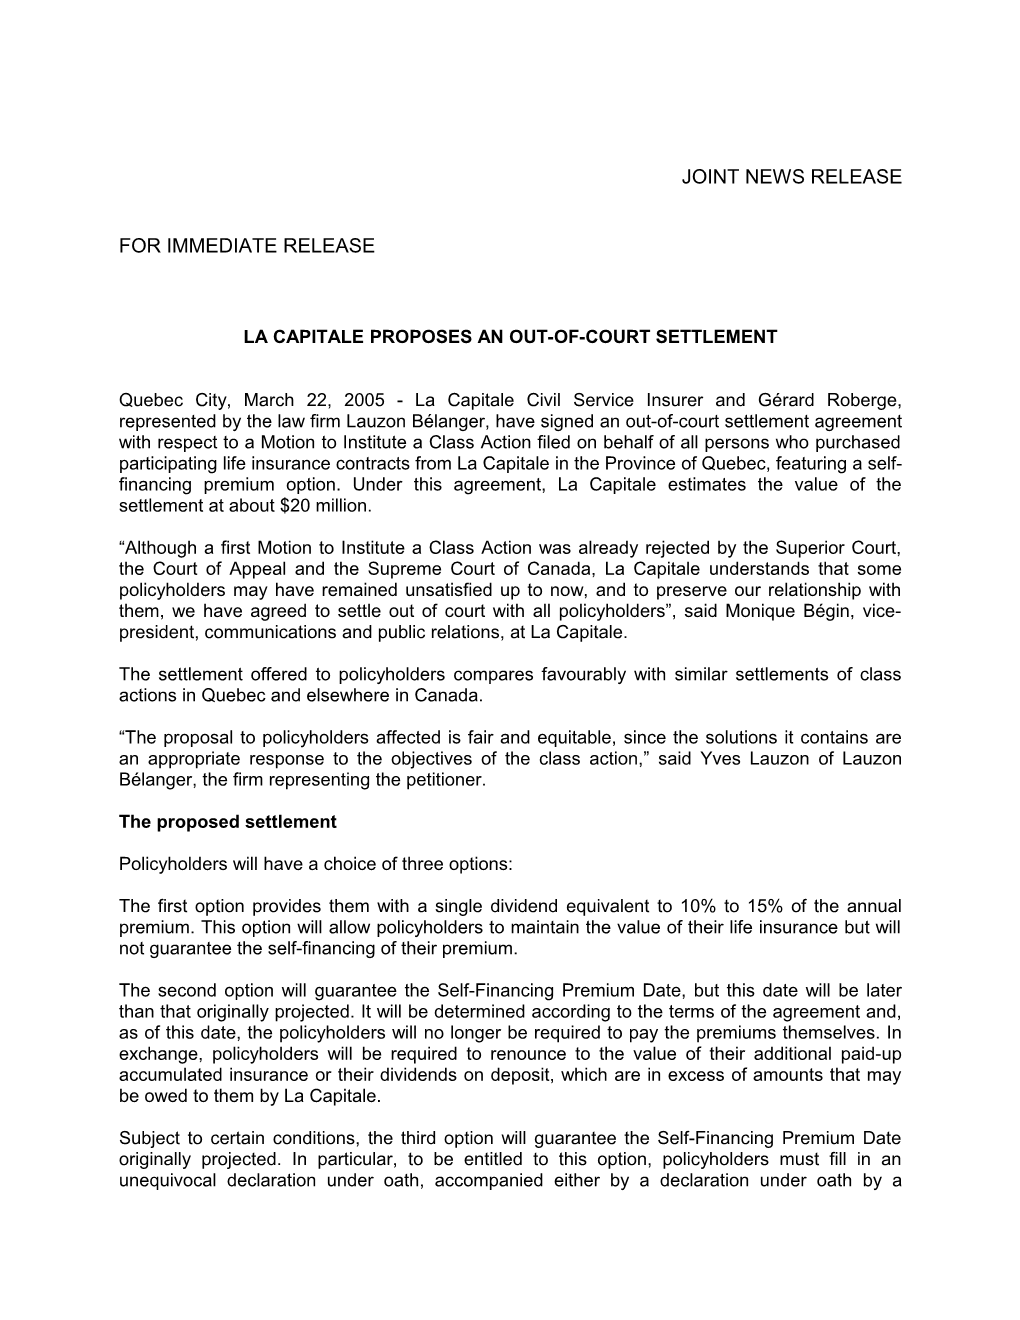 La Capitale Proposes an Out-Of-Courtsettlement